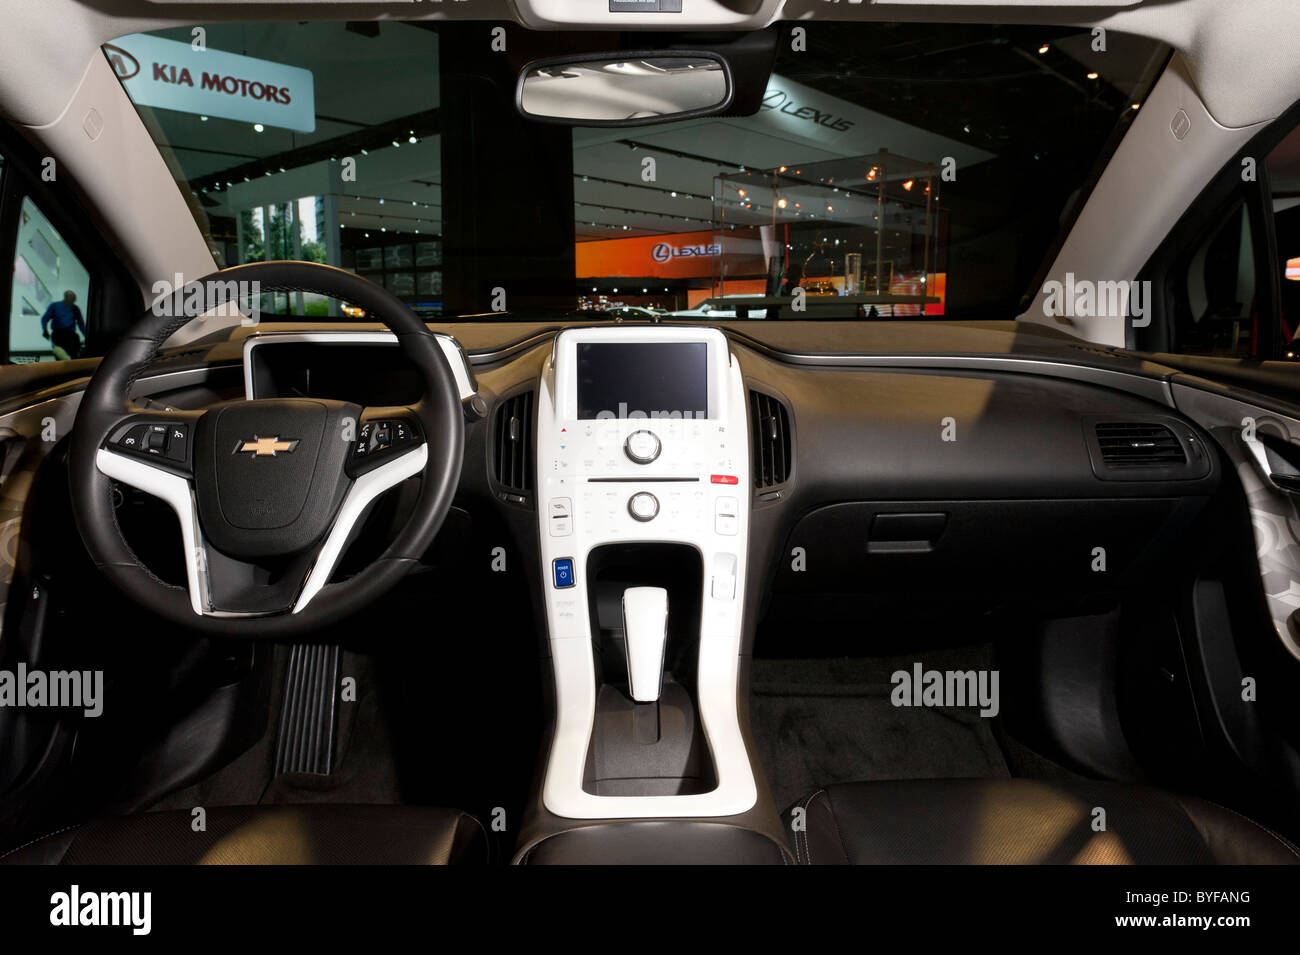 Chevrolet Volt interior at the 2011 North American International Auto Show in Detroit Stock Photo